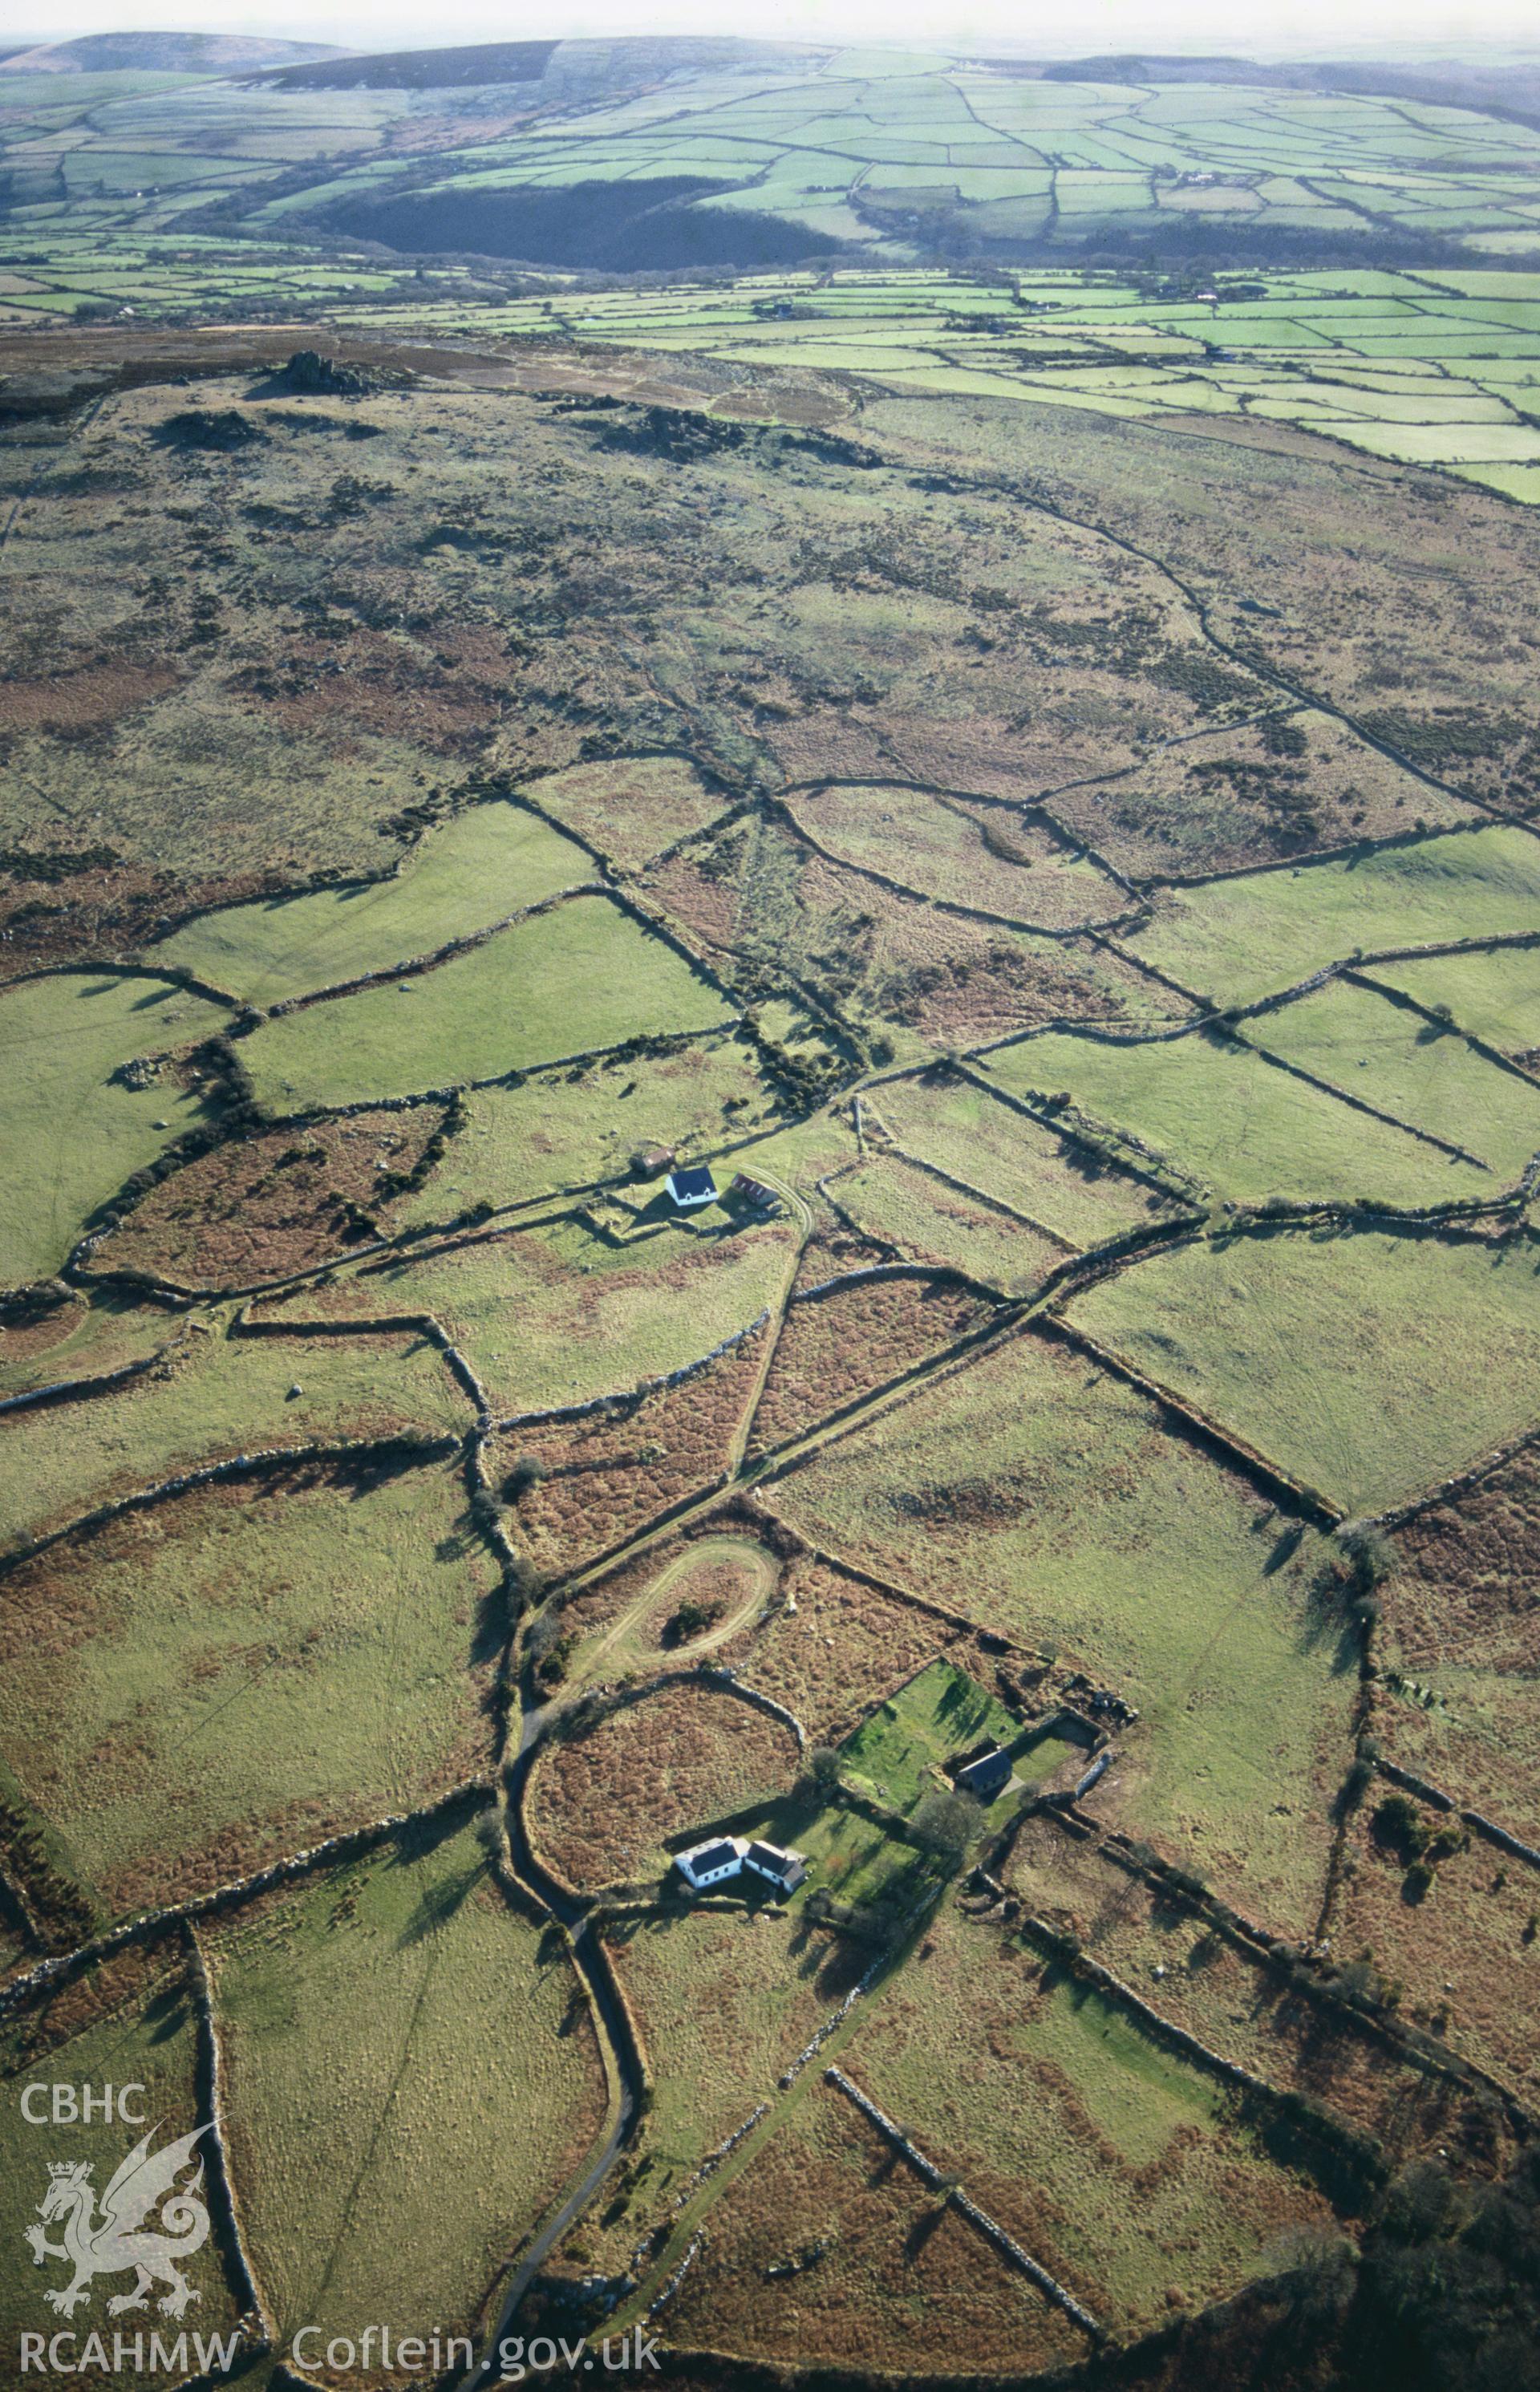 Slide of RCAHMW colour oblique aerial photograph of Bryn Hyfryd Settlement Features, taken by Toby Driver, 2004.